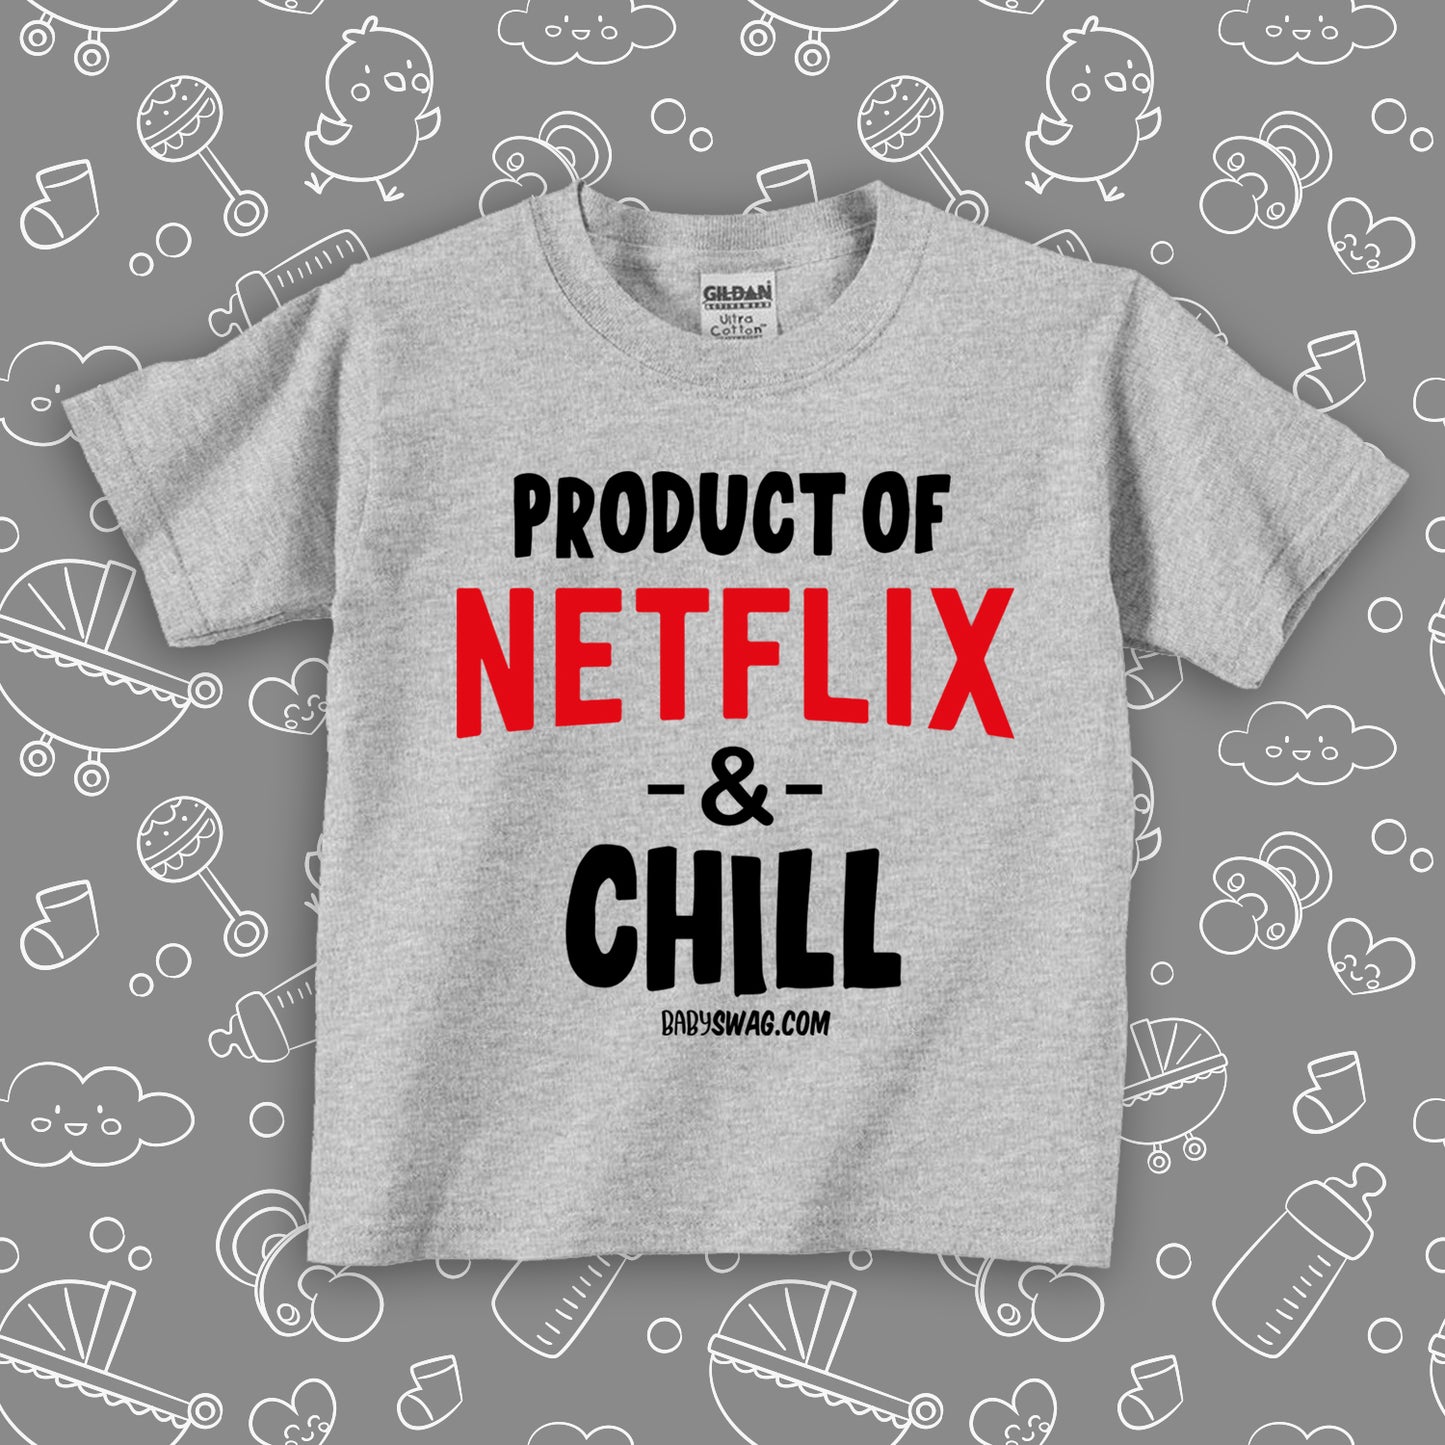 Toddler shirt with saying "Product Of Netflic & Chill" in grey. 